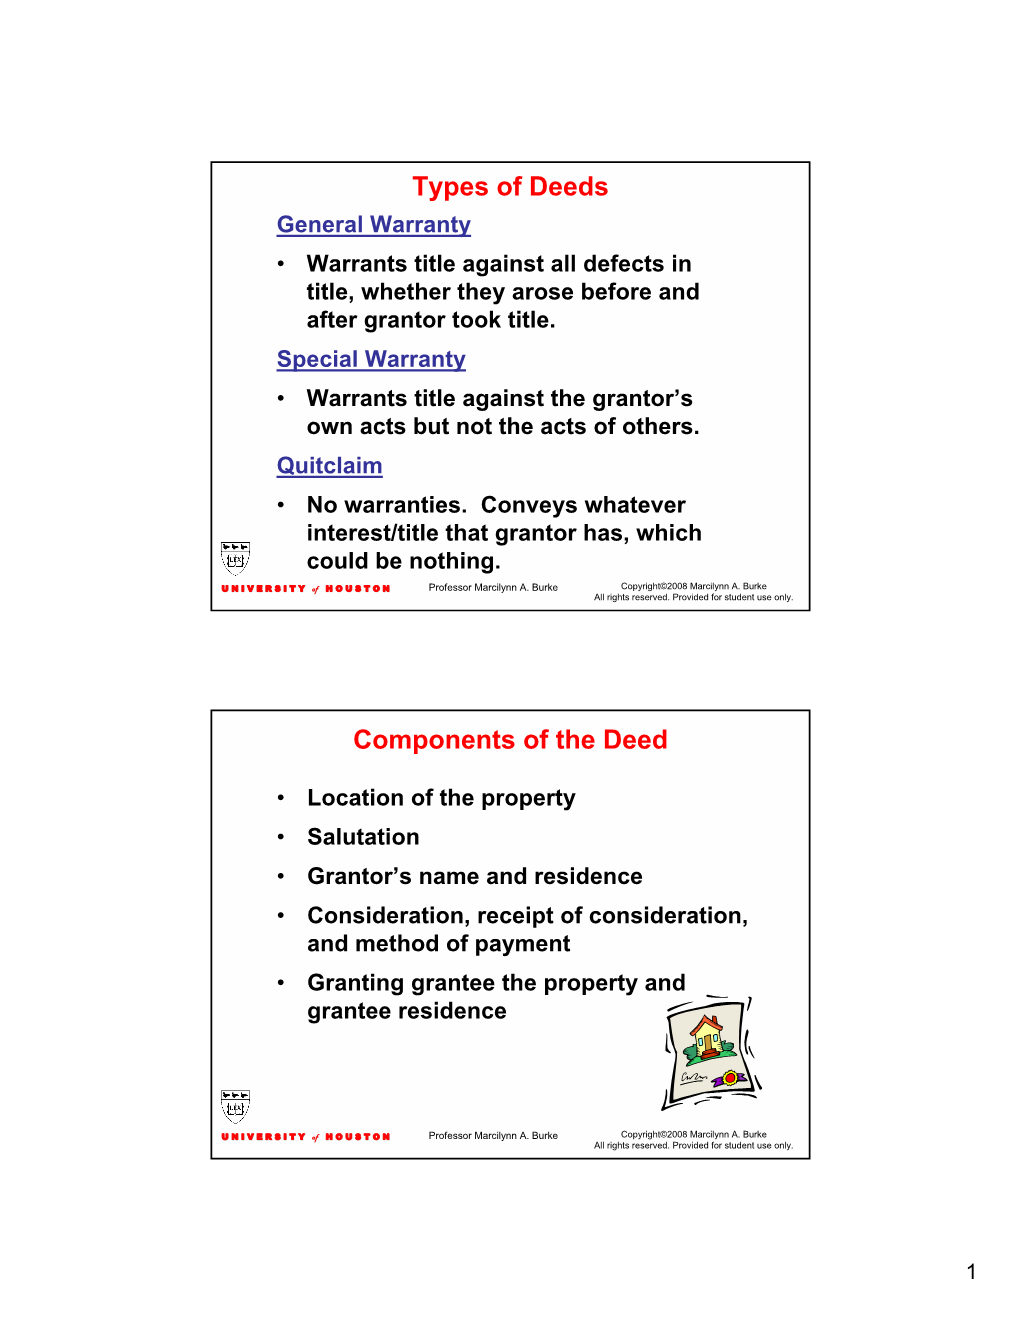 Types of Deeds Components of the Deed